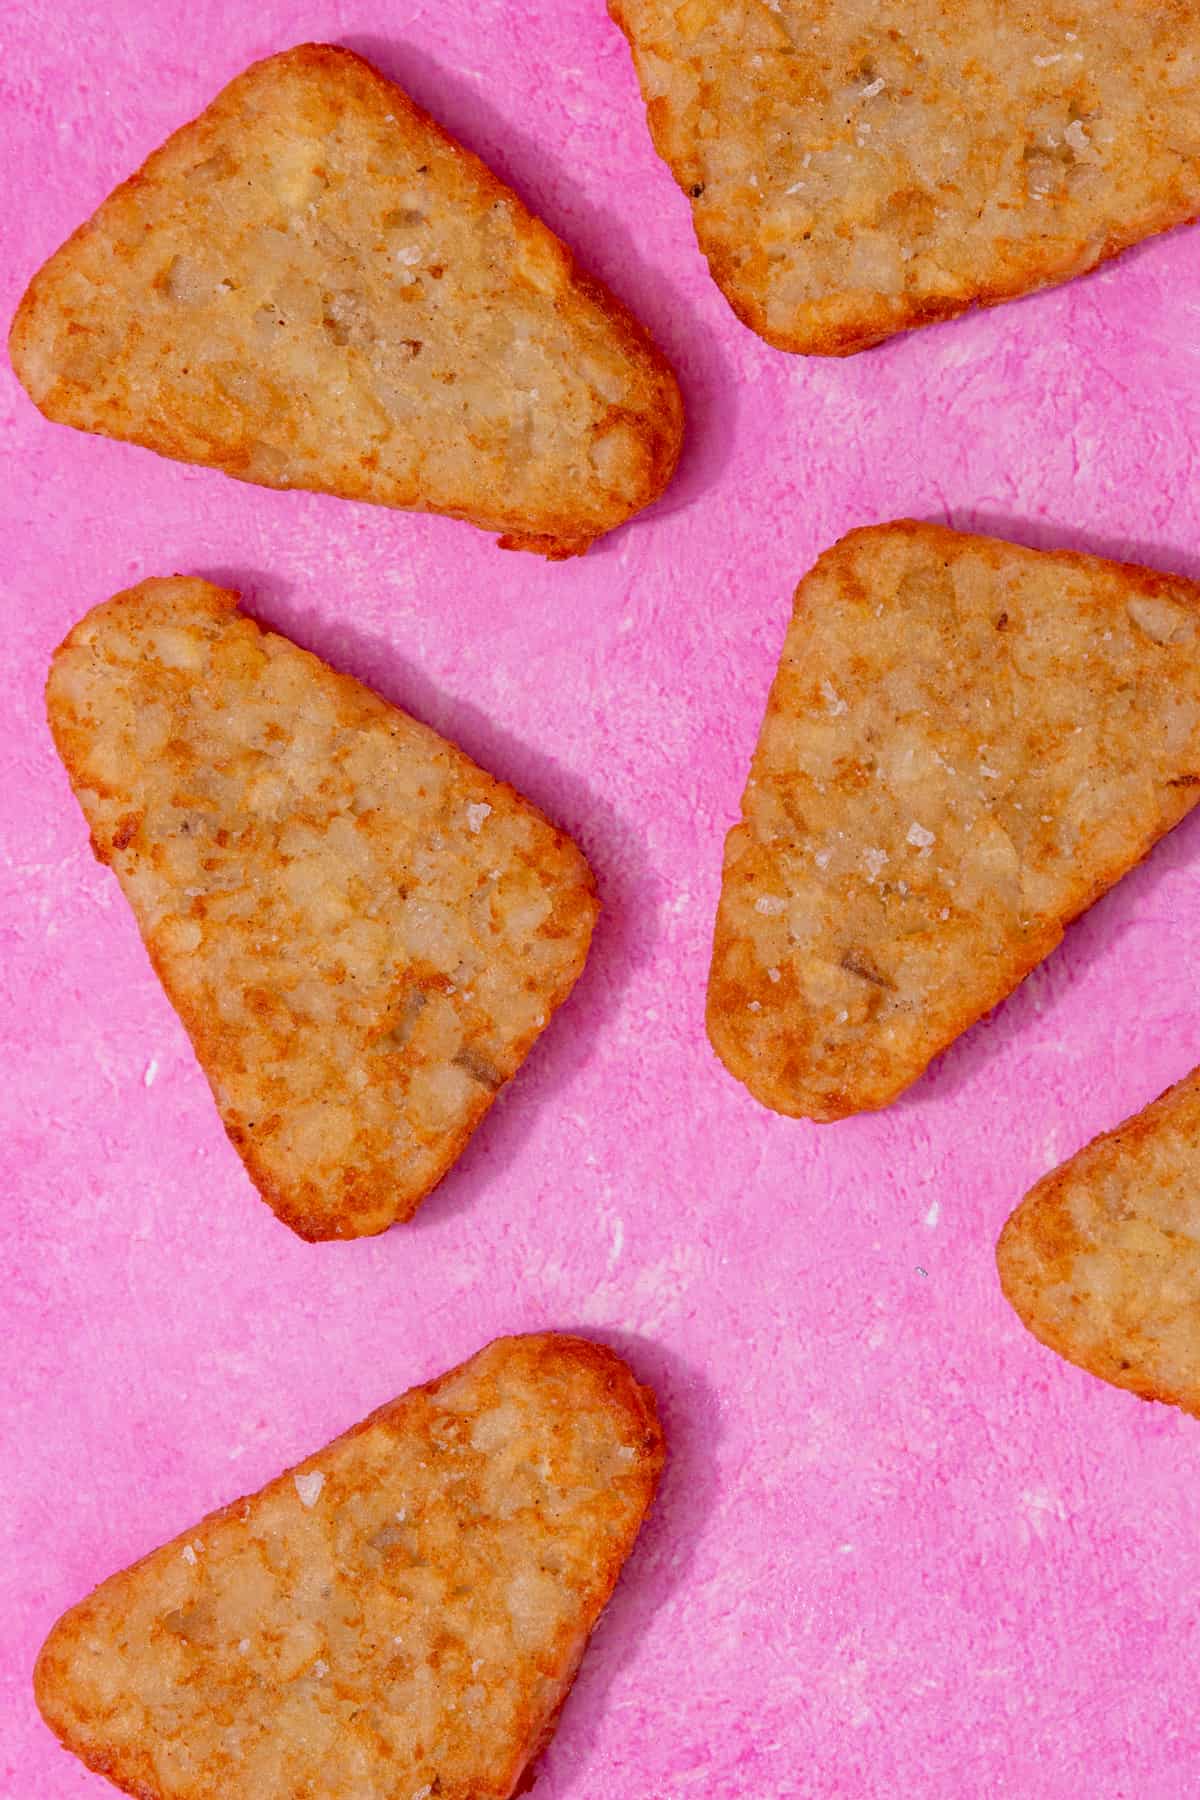 Frozen hash browns laid out on a pink background.